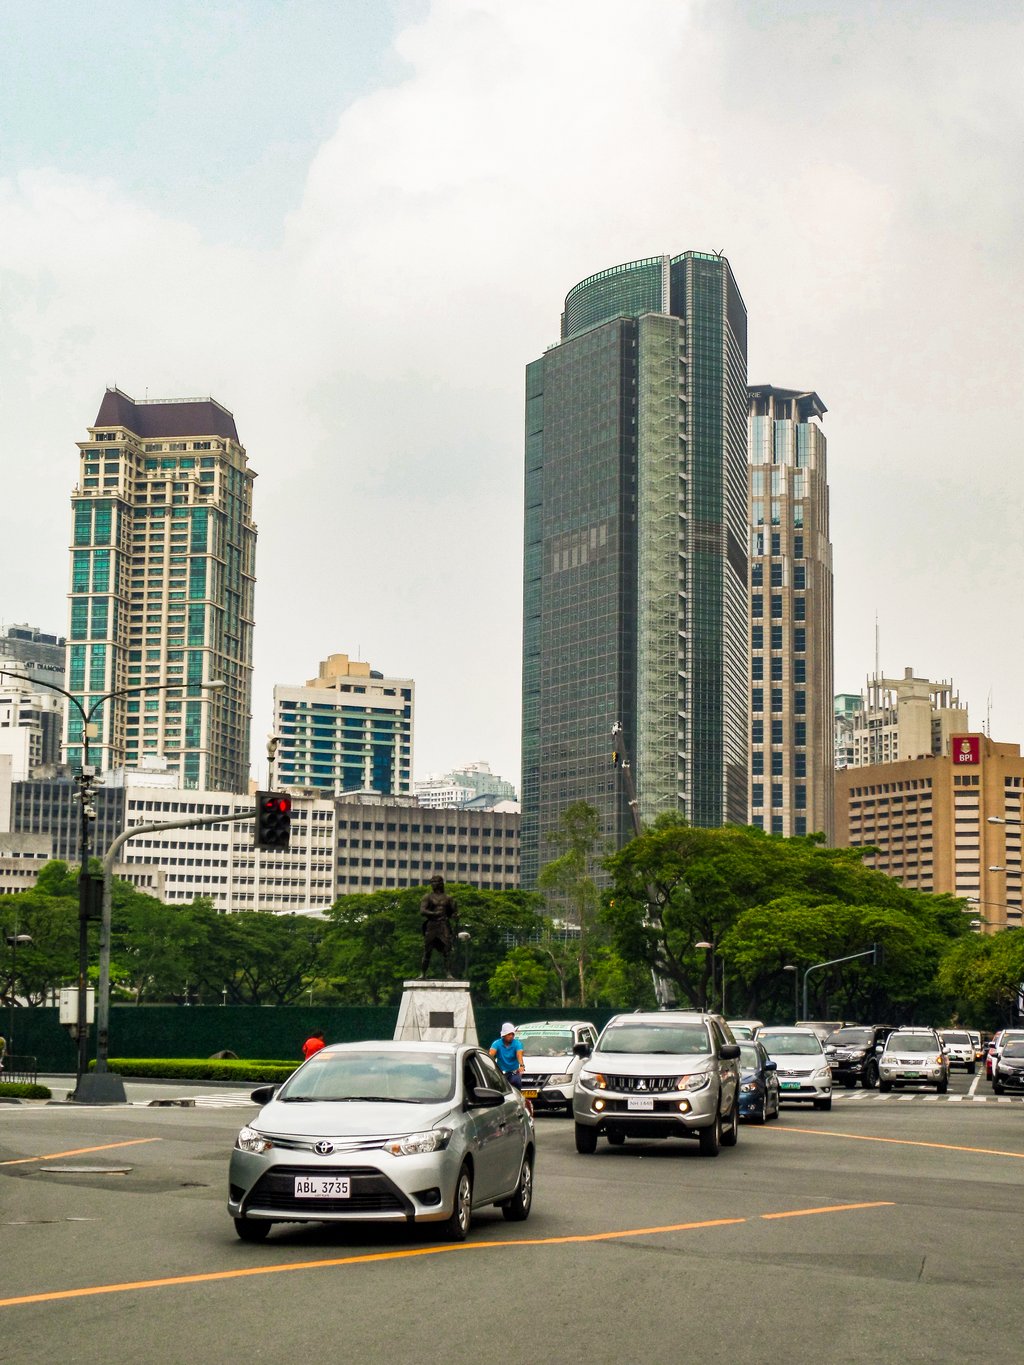 <img src="road.gif" alt="cars on a road in Manila city">